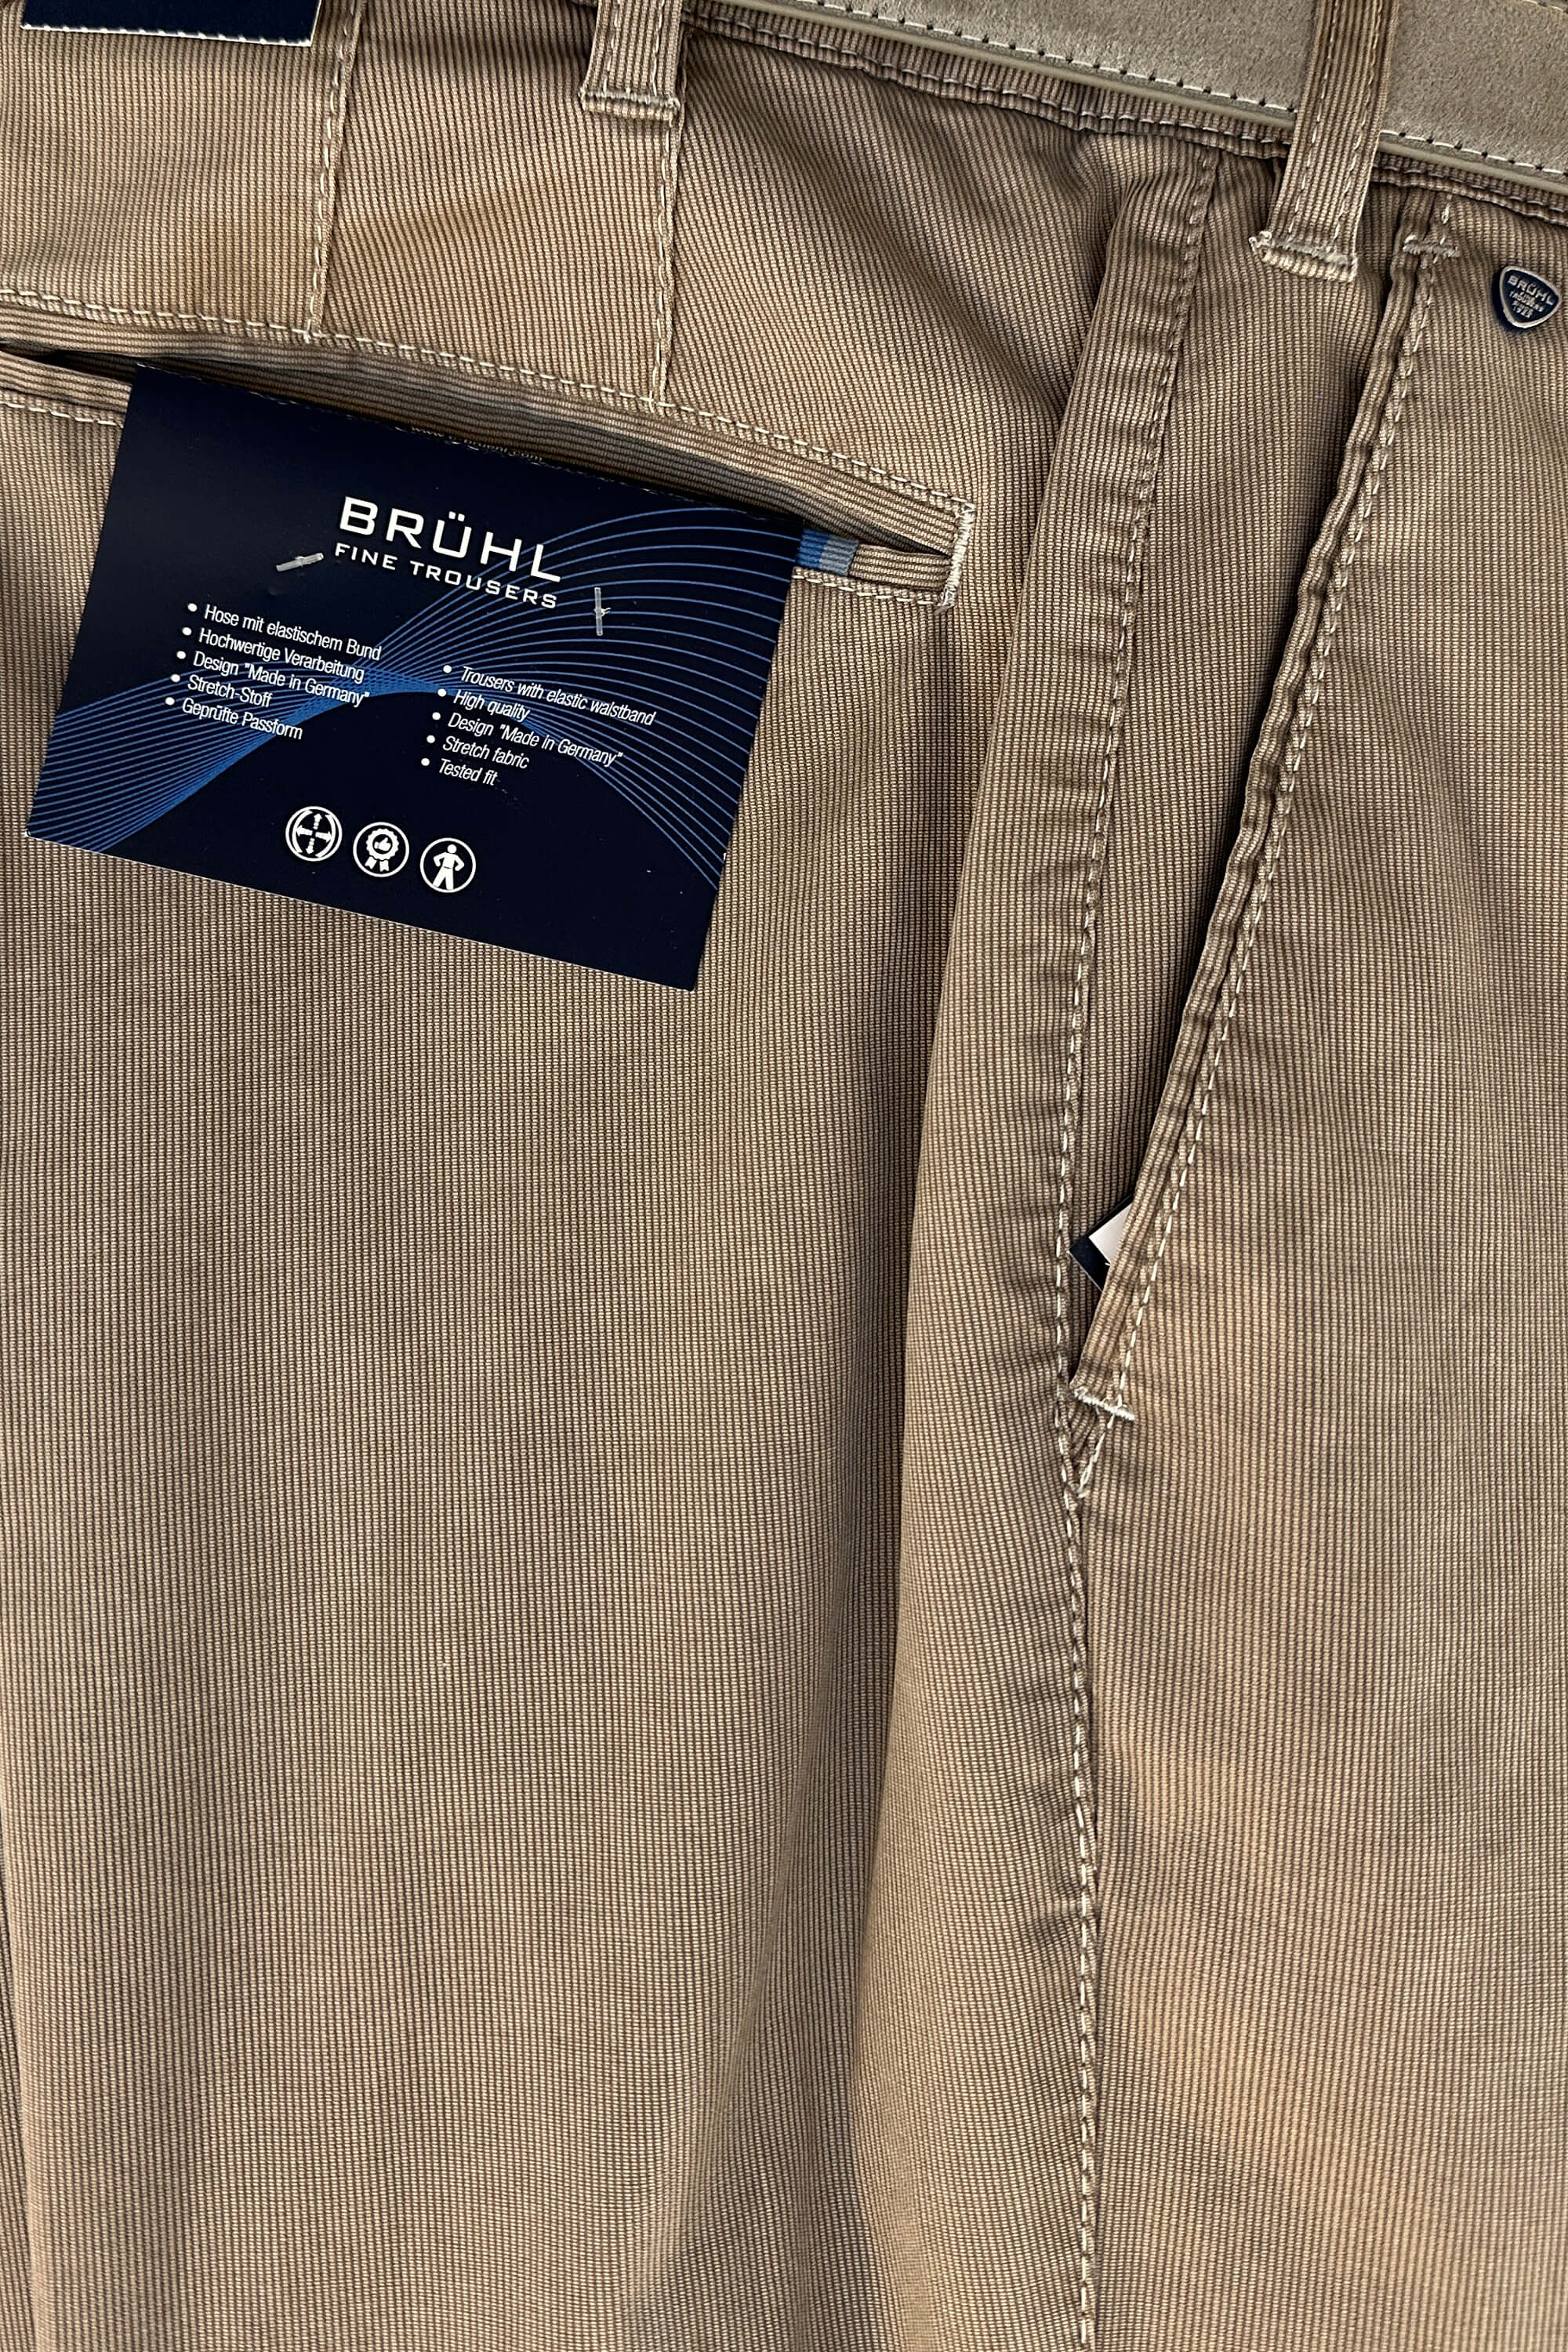 Bruhl Parma Putty Trousers